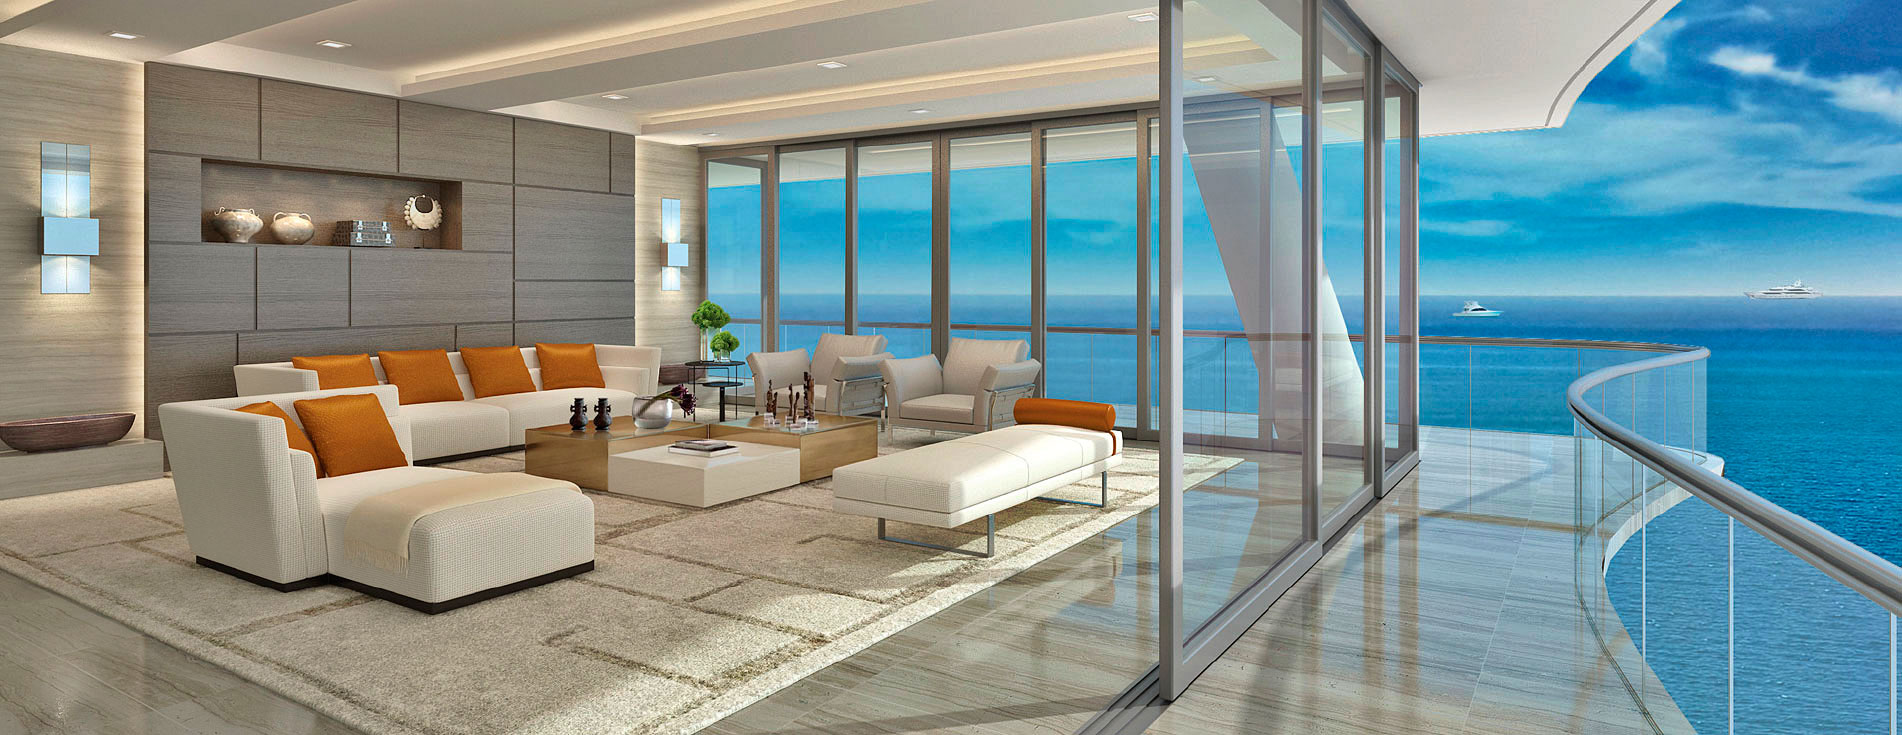 Fendi Chateau Bal Harbour Suffise ARIA Luxe Realty